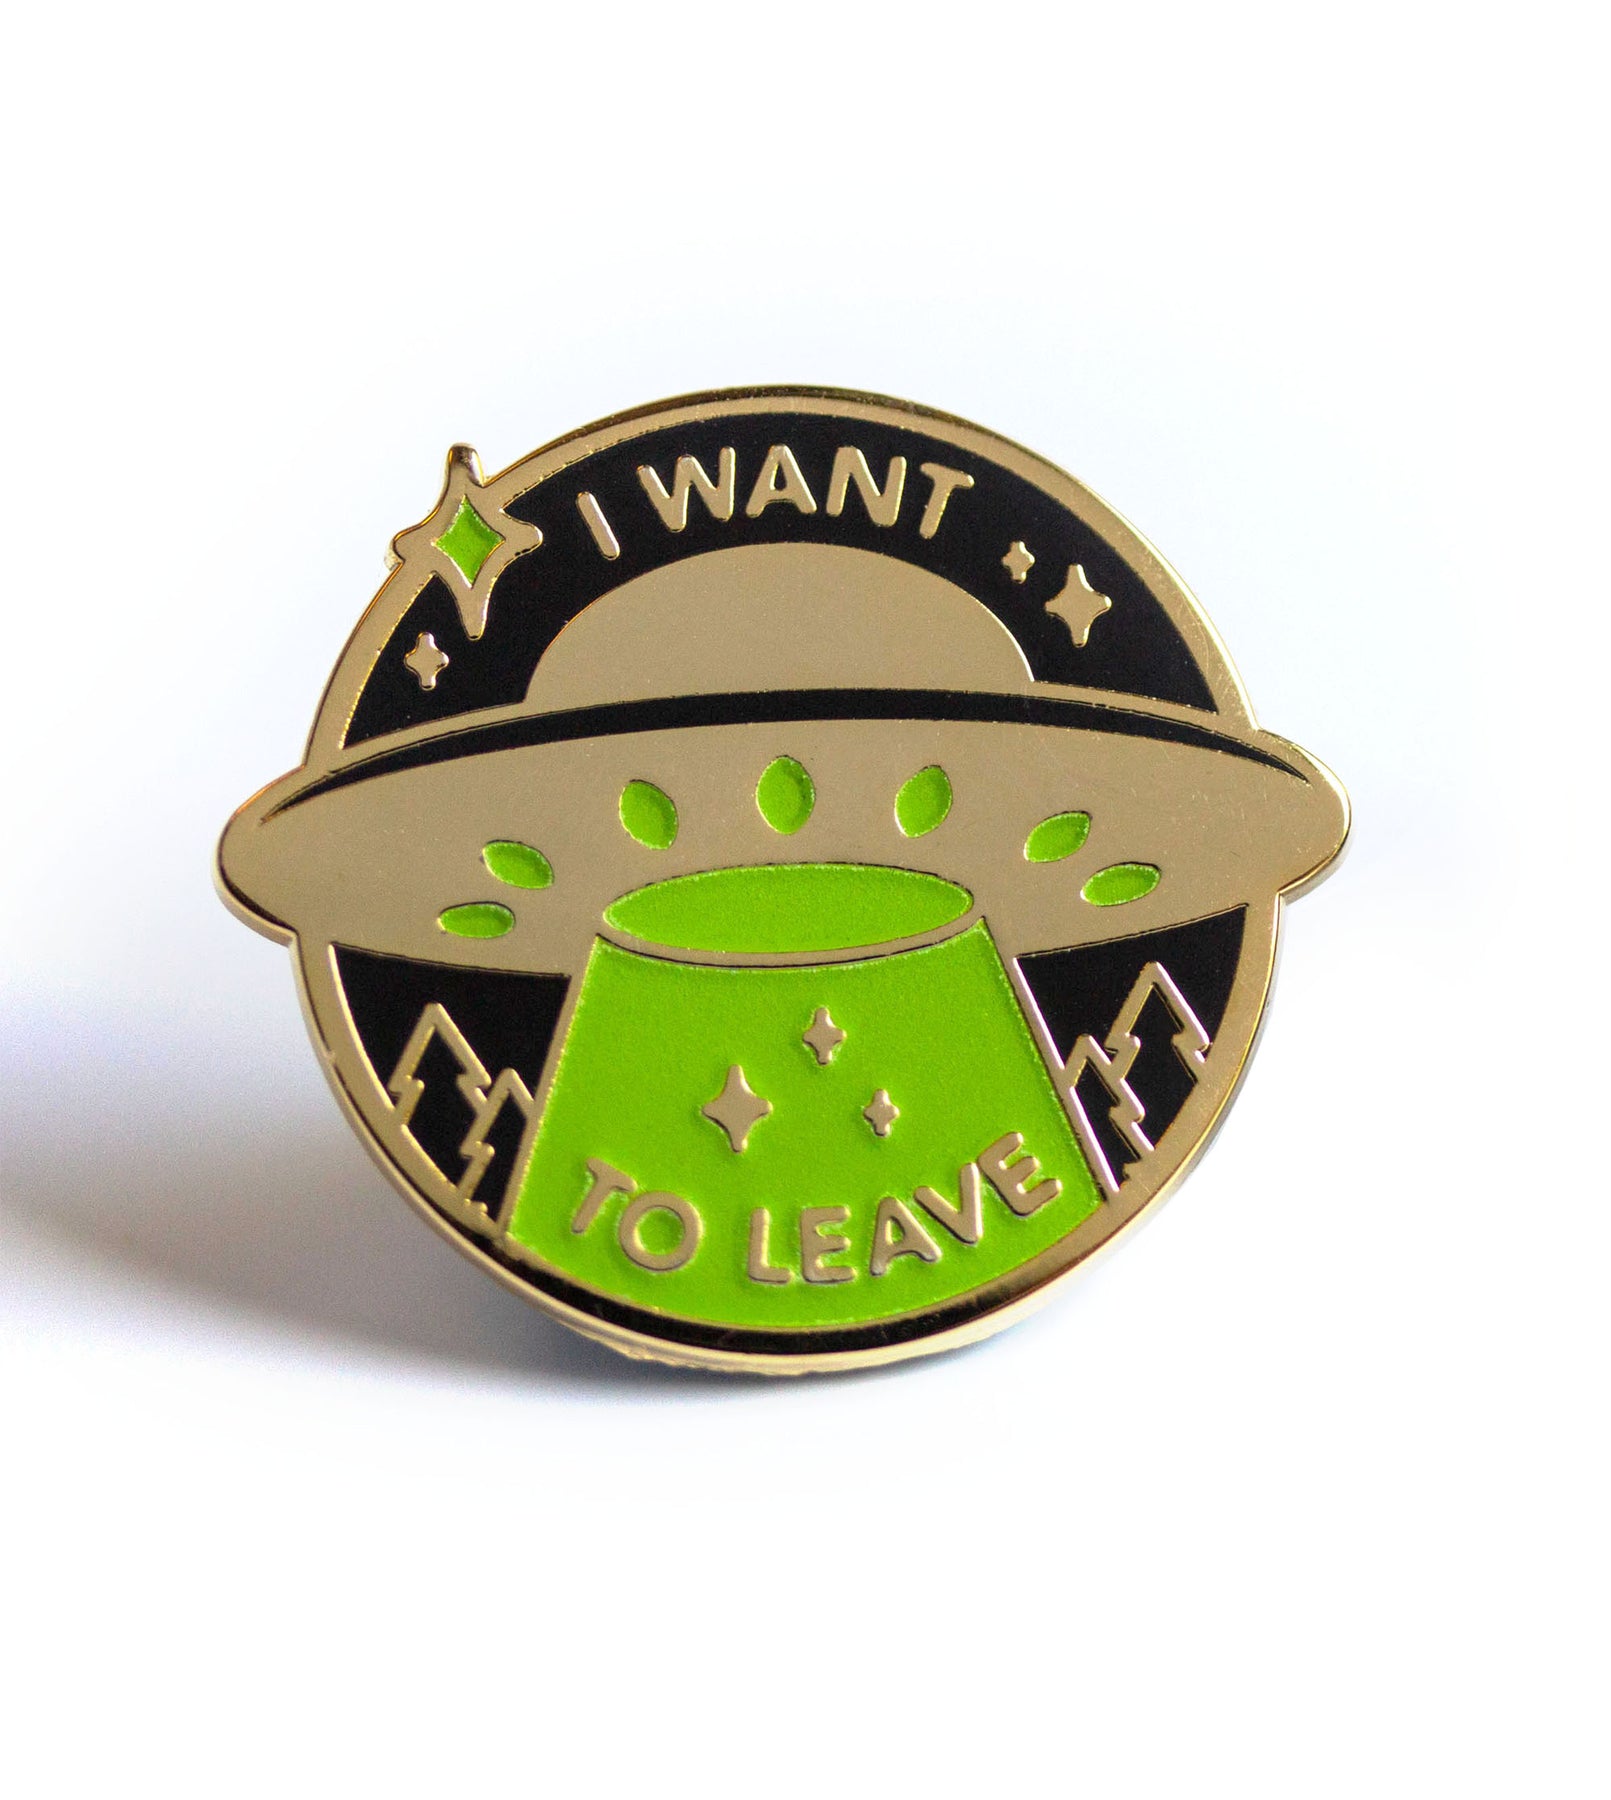 Pin on I want